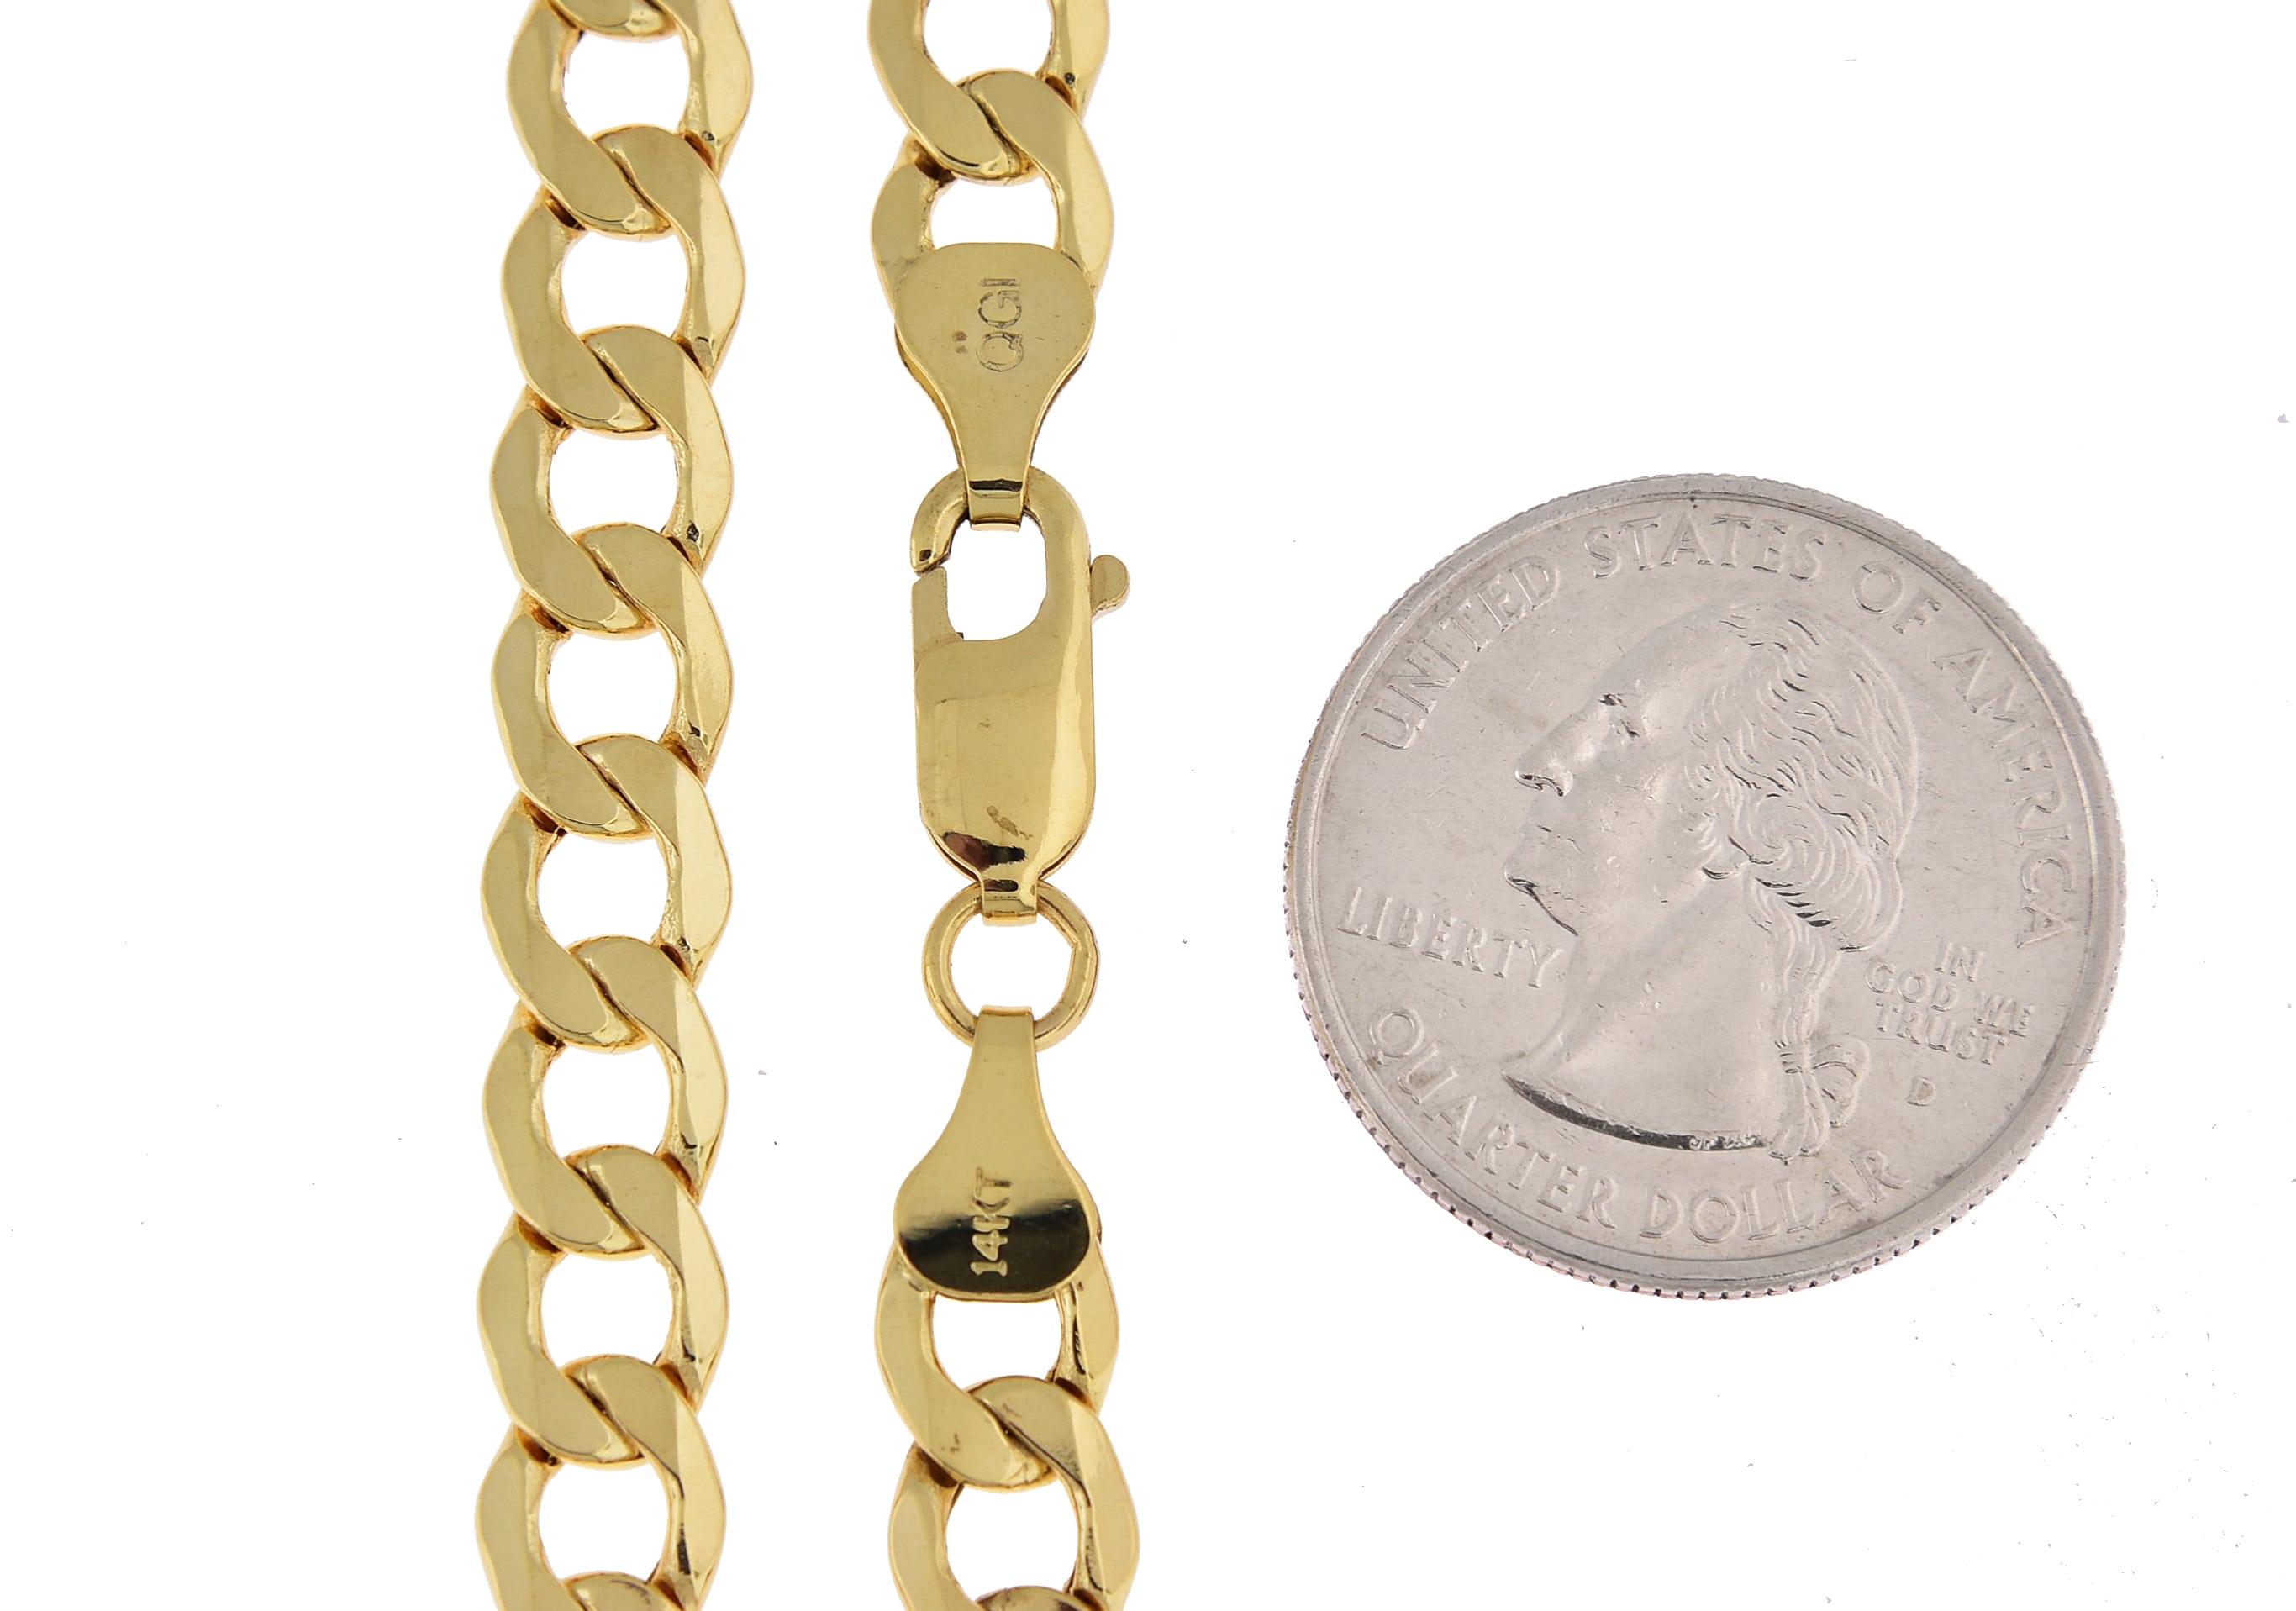 14K Yellow Gold 7mm Curb Link Bracelet Anklet Choker Necklace Pendant Chain with Lobster Clasp